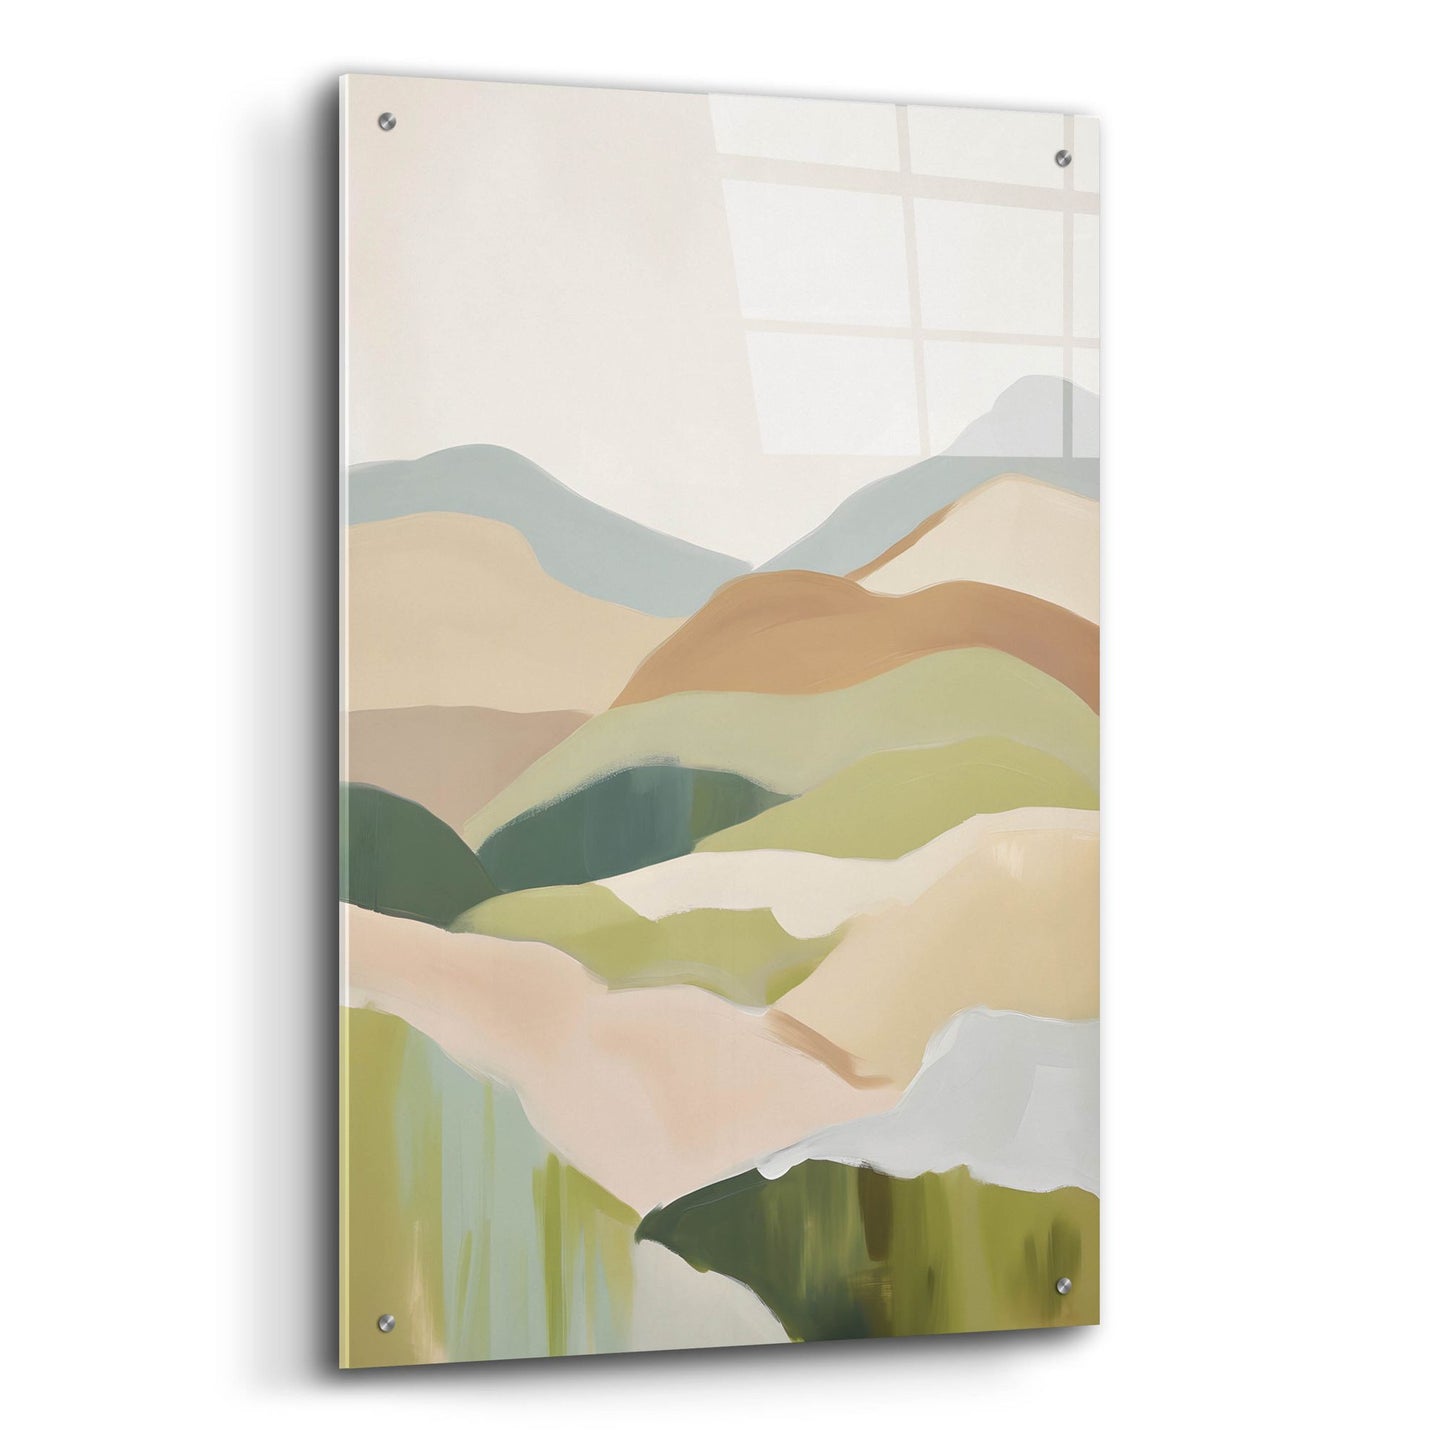 Epic Art 'Abstract Mountain 2' by Petals Prints Design, Acrylic Glass Wall Art,24x36